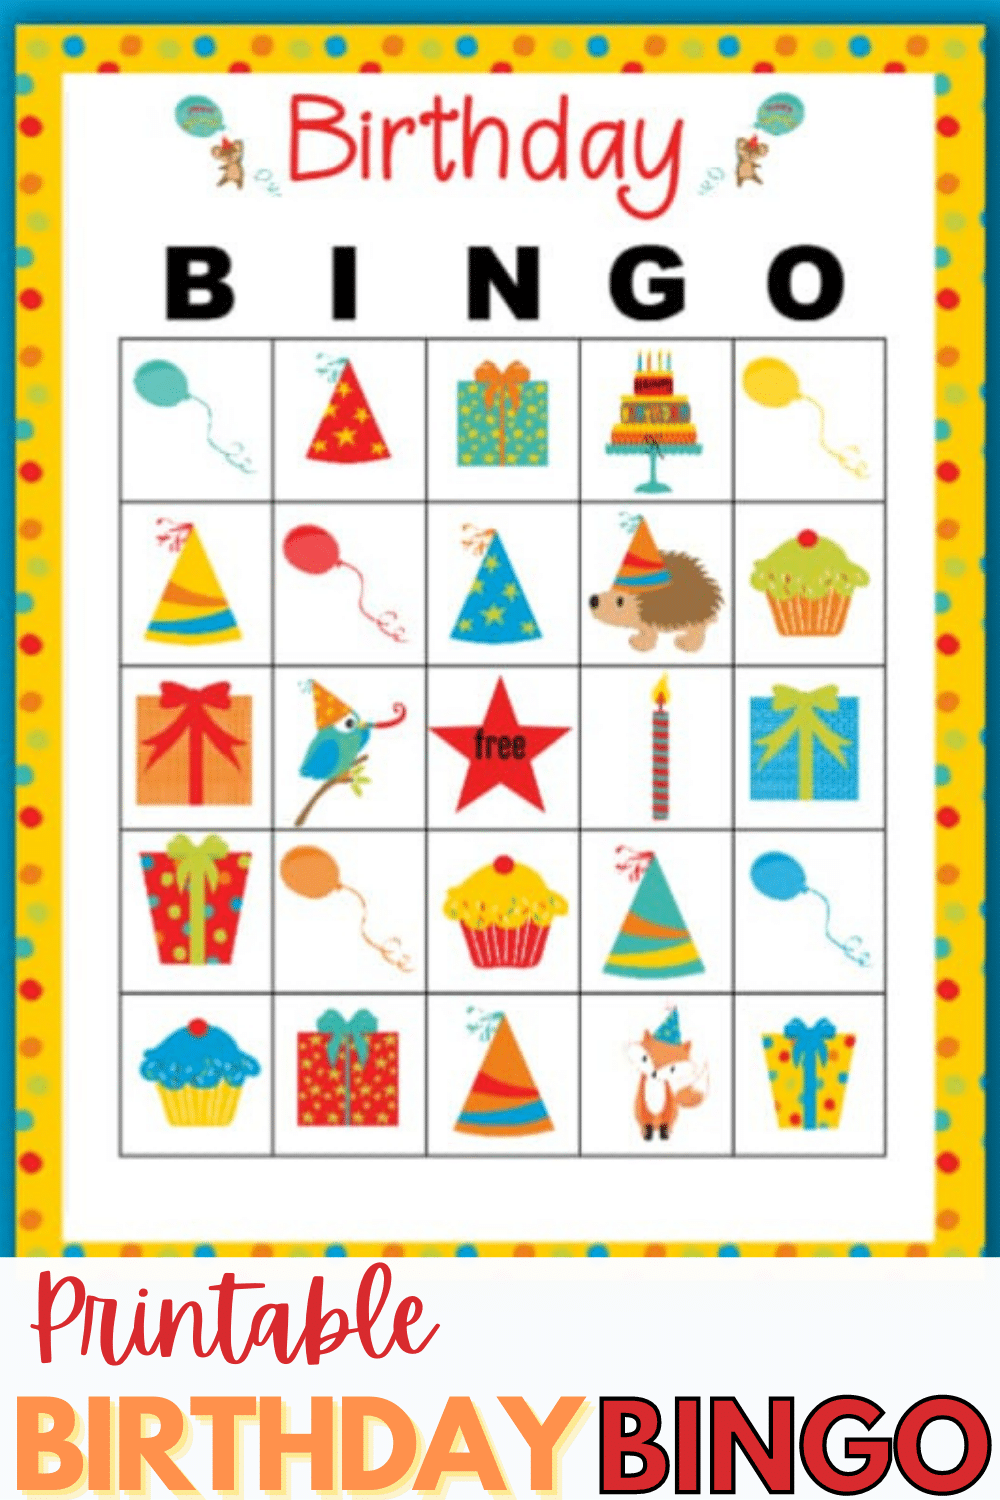 Printable birthday bingo cards are a fun way to keep kids entertained at a home birthday party. These brightly colored cards are perfect for boys or girls. #bingo #printables #birthdayparties via @wondermomwannab